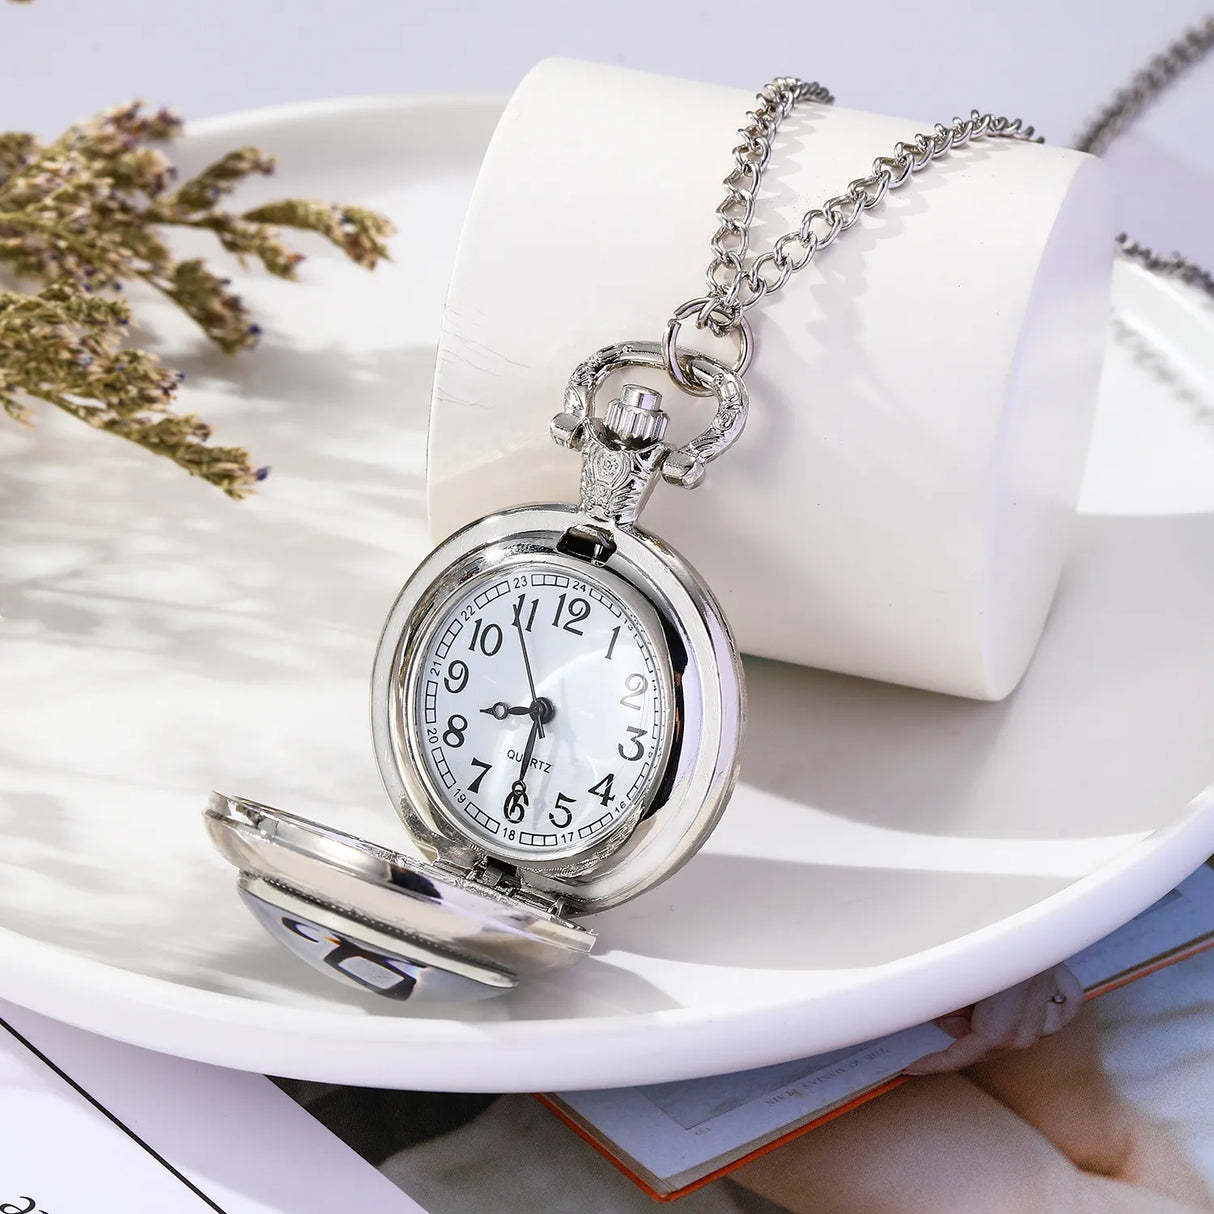 Show of your Genshin Impact spirit with our brand new Pocket Watch  | If you are looking for more Genshin Impact Merch, We have it all! | Check out all our Anime Merch now!